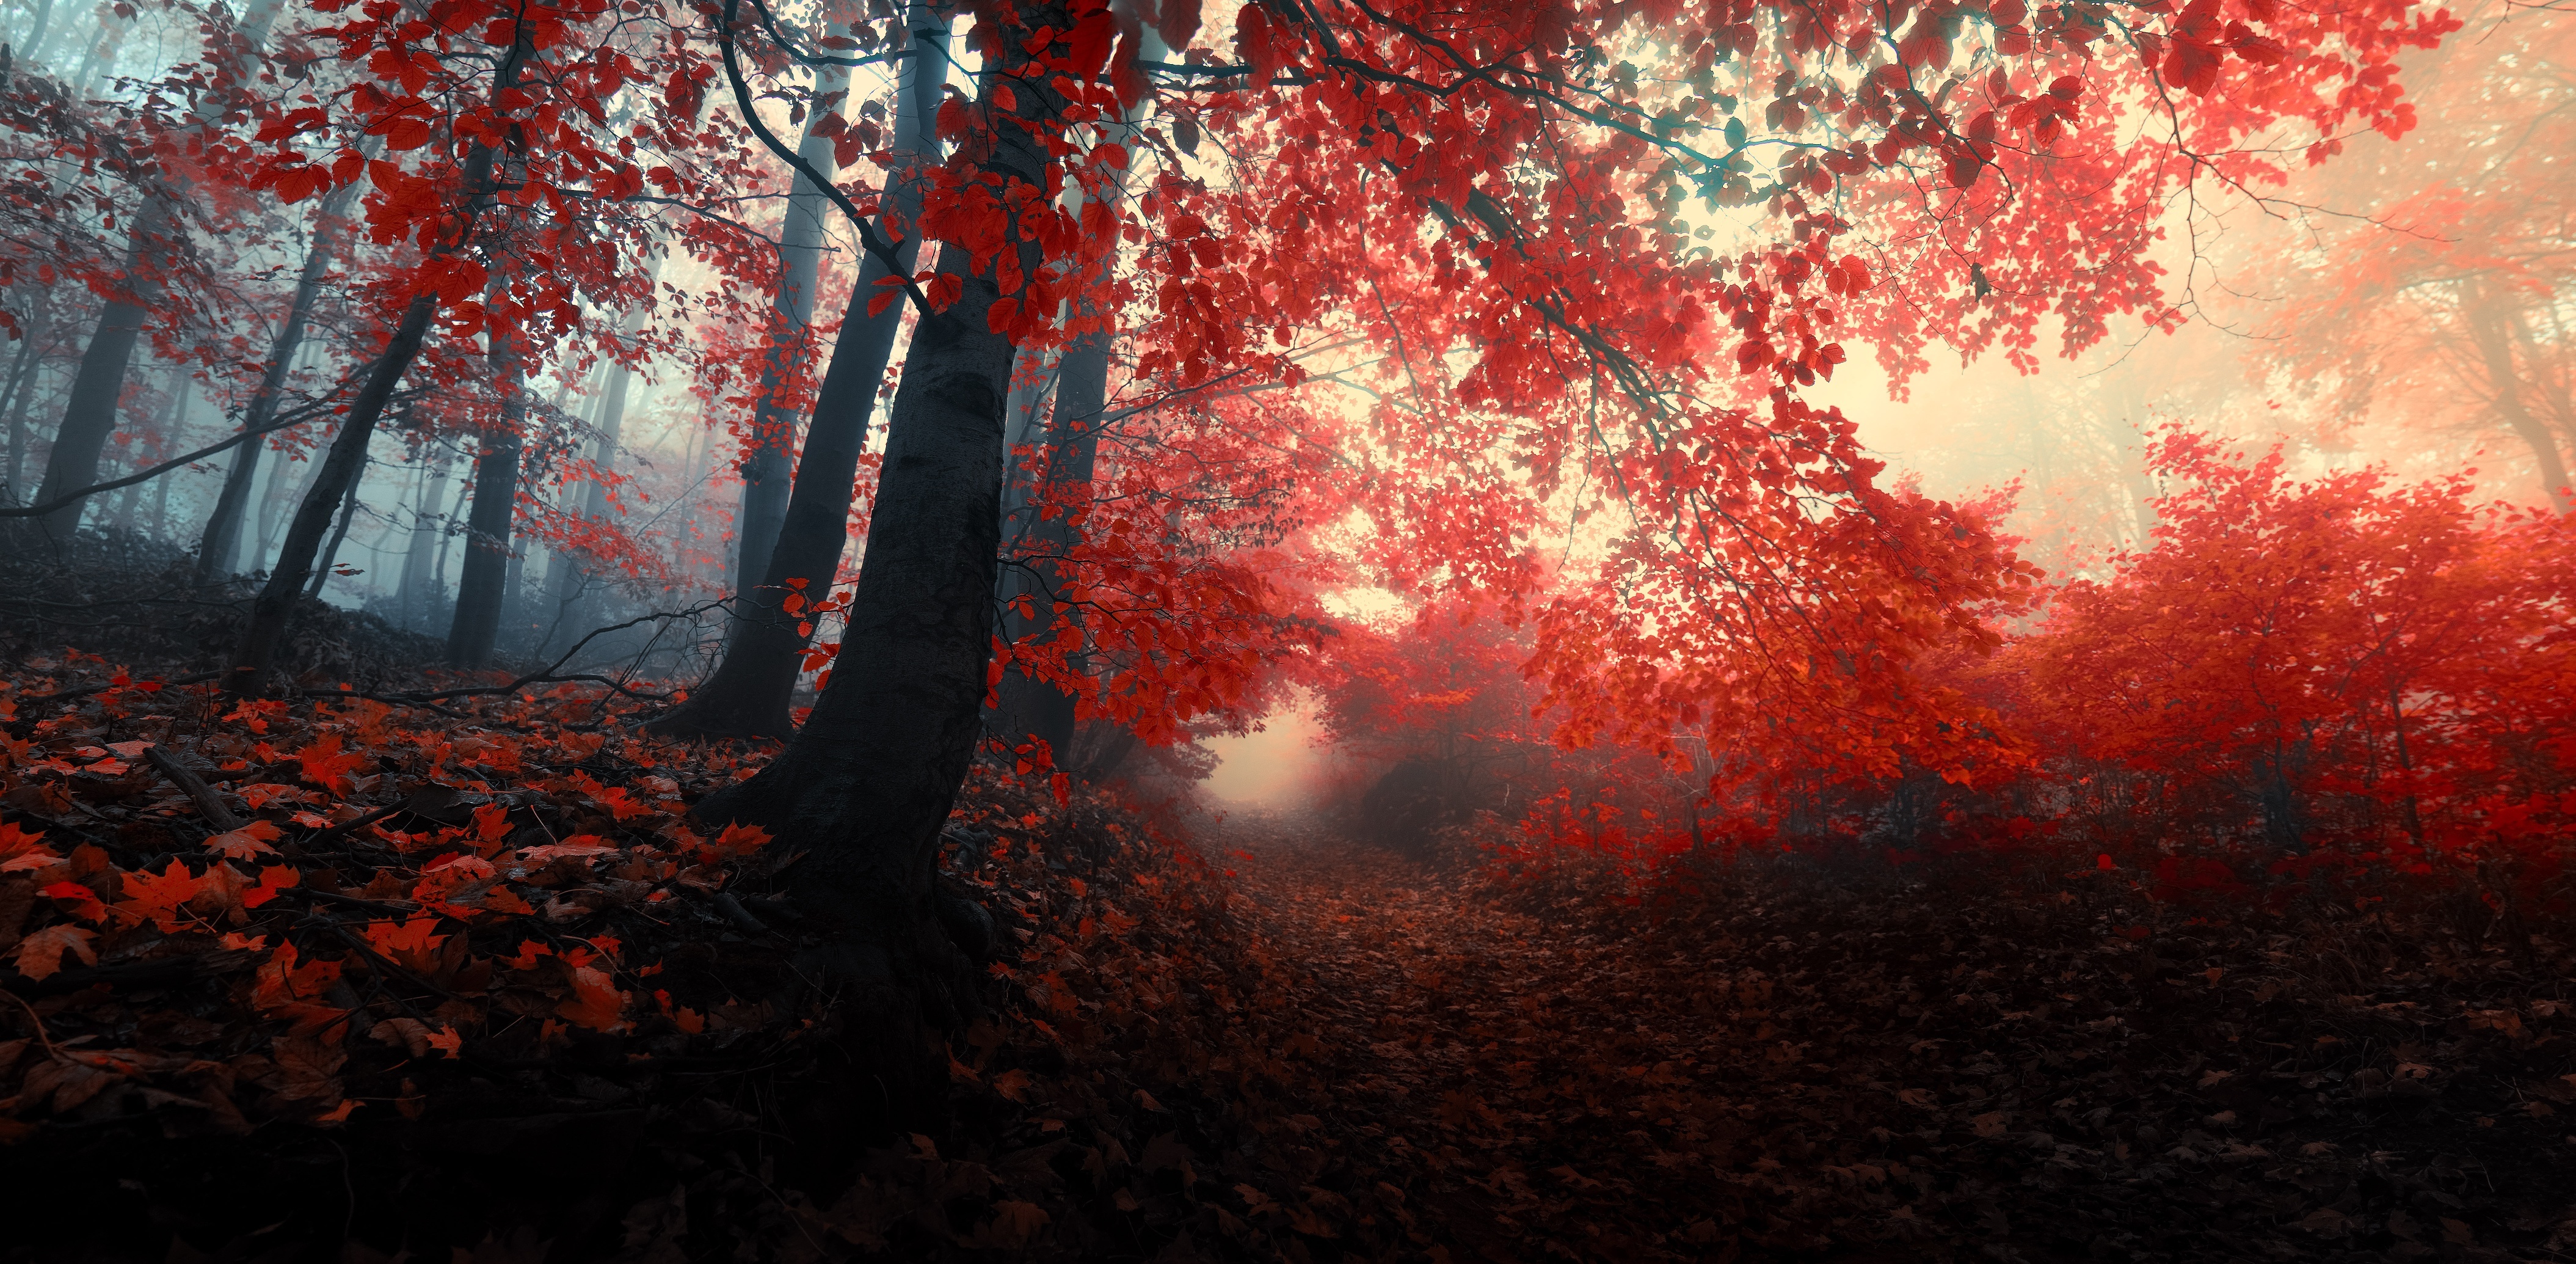 Red Autumn Leaves Trees Forest Background HD Nature Wallpapers  HD  Wallpapers  ID 81700